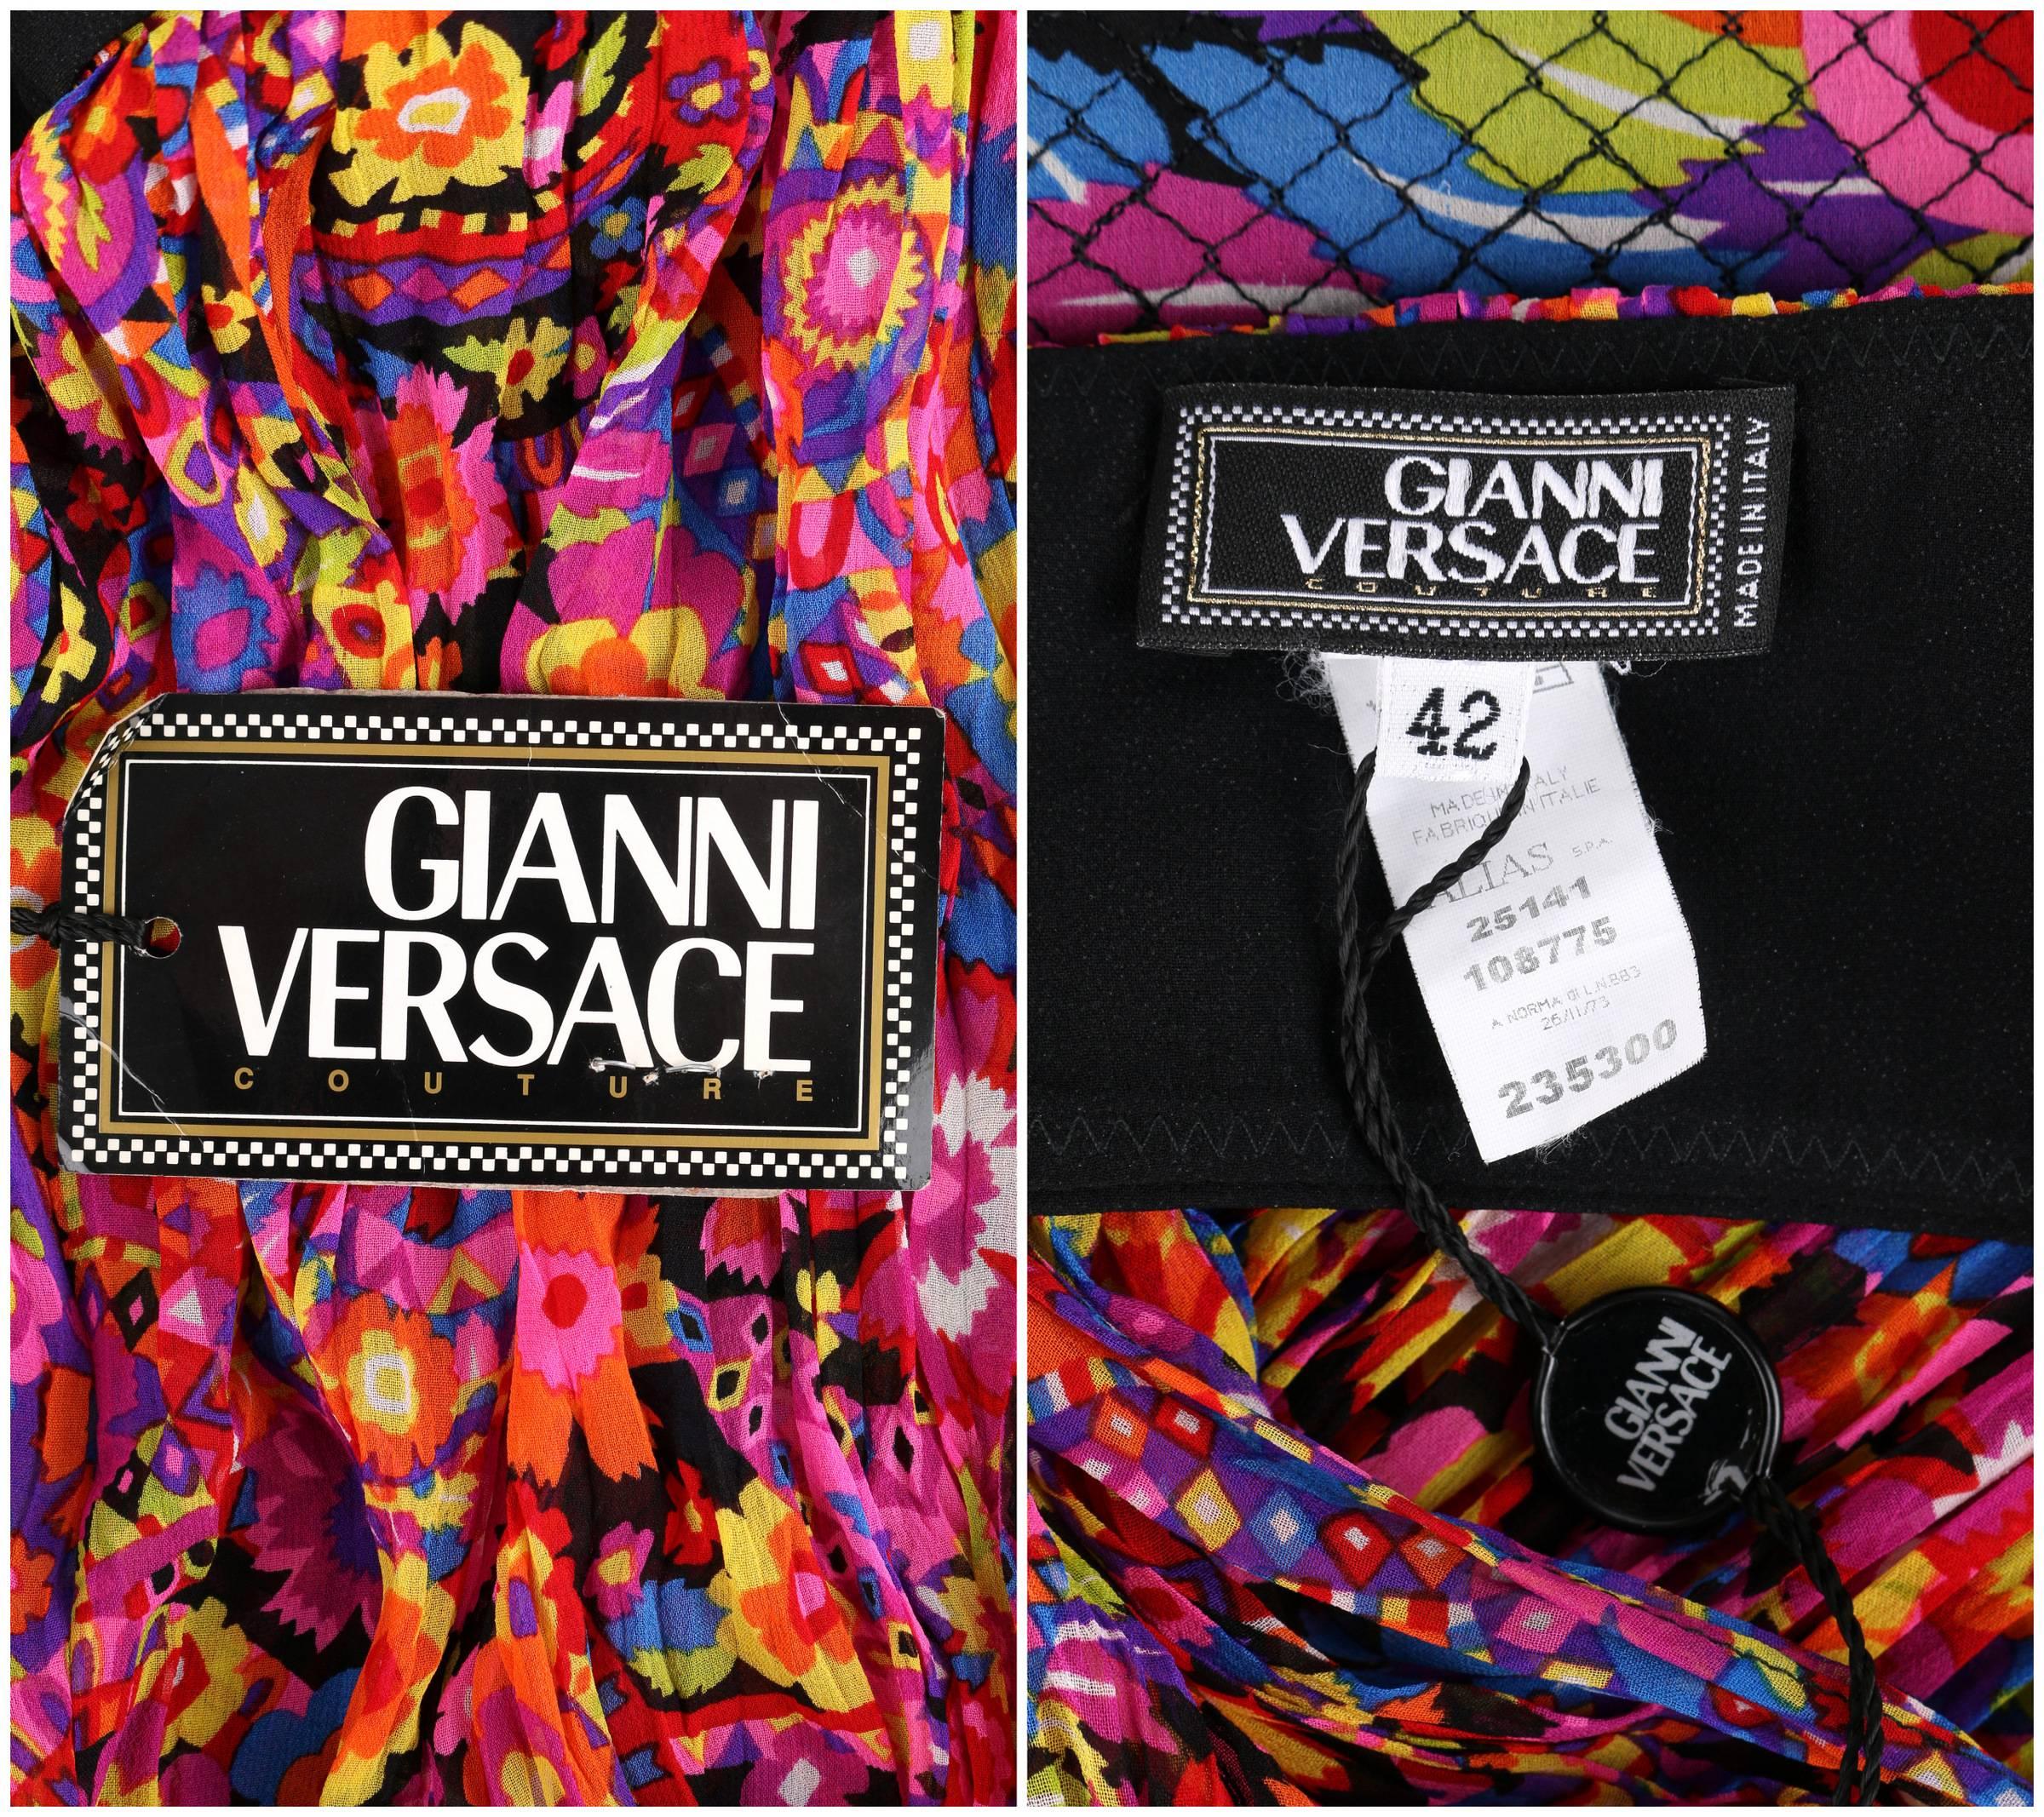 GIANNI VERSACE COUTURE A/W 2002 Floral Print Strapless Quilted Skirt Silk Dress 4